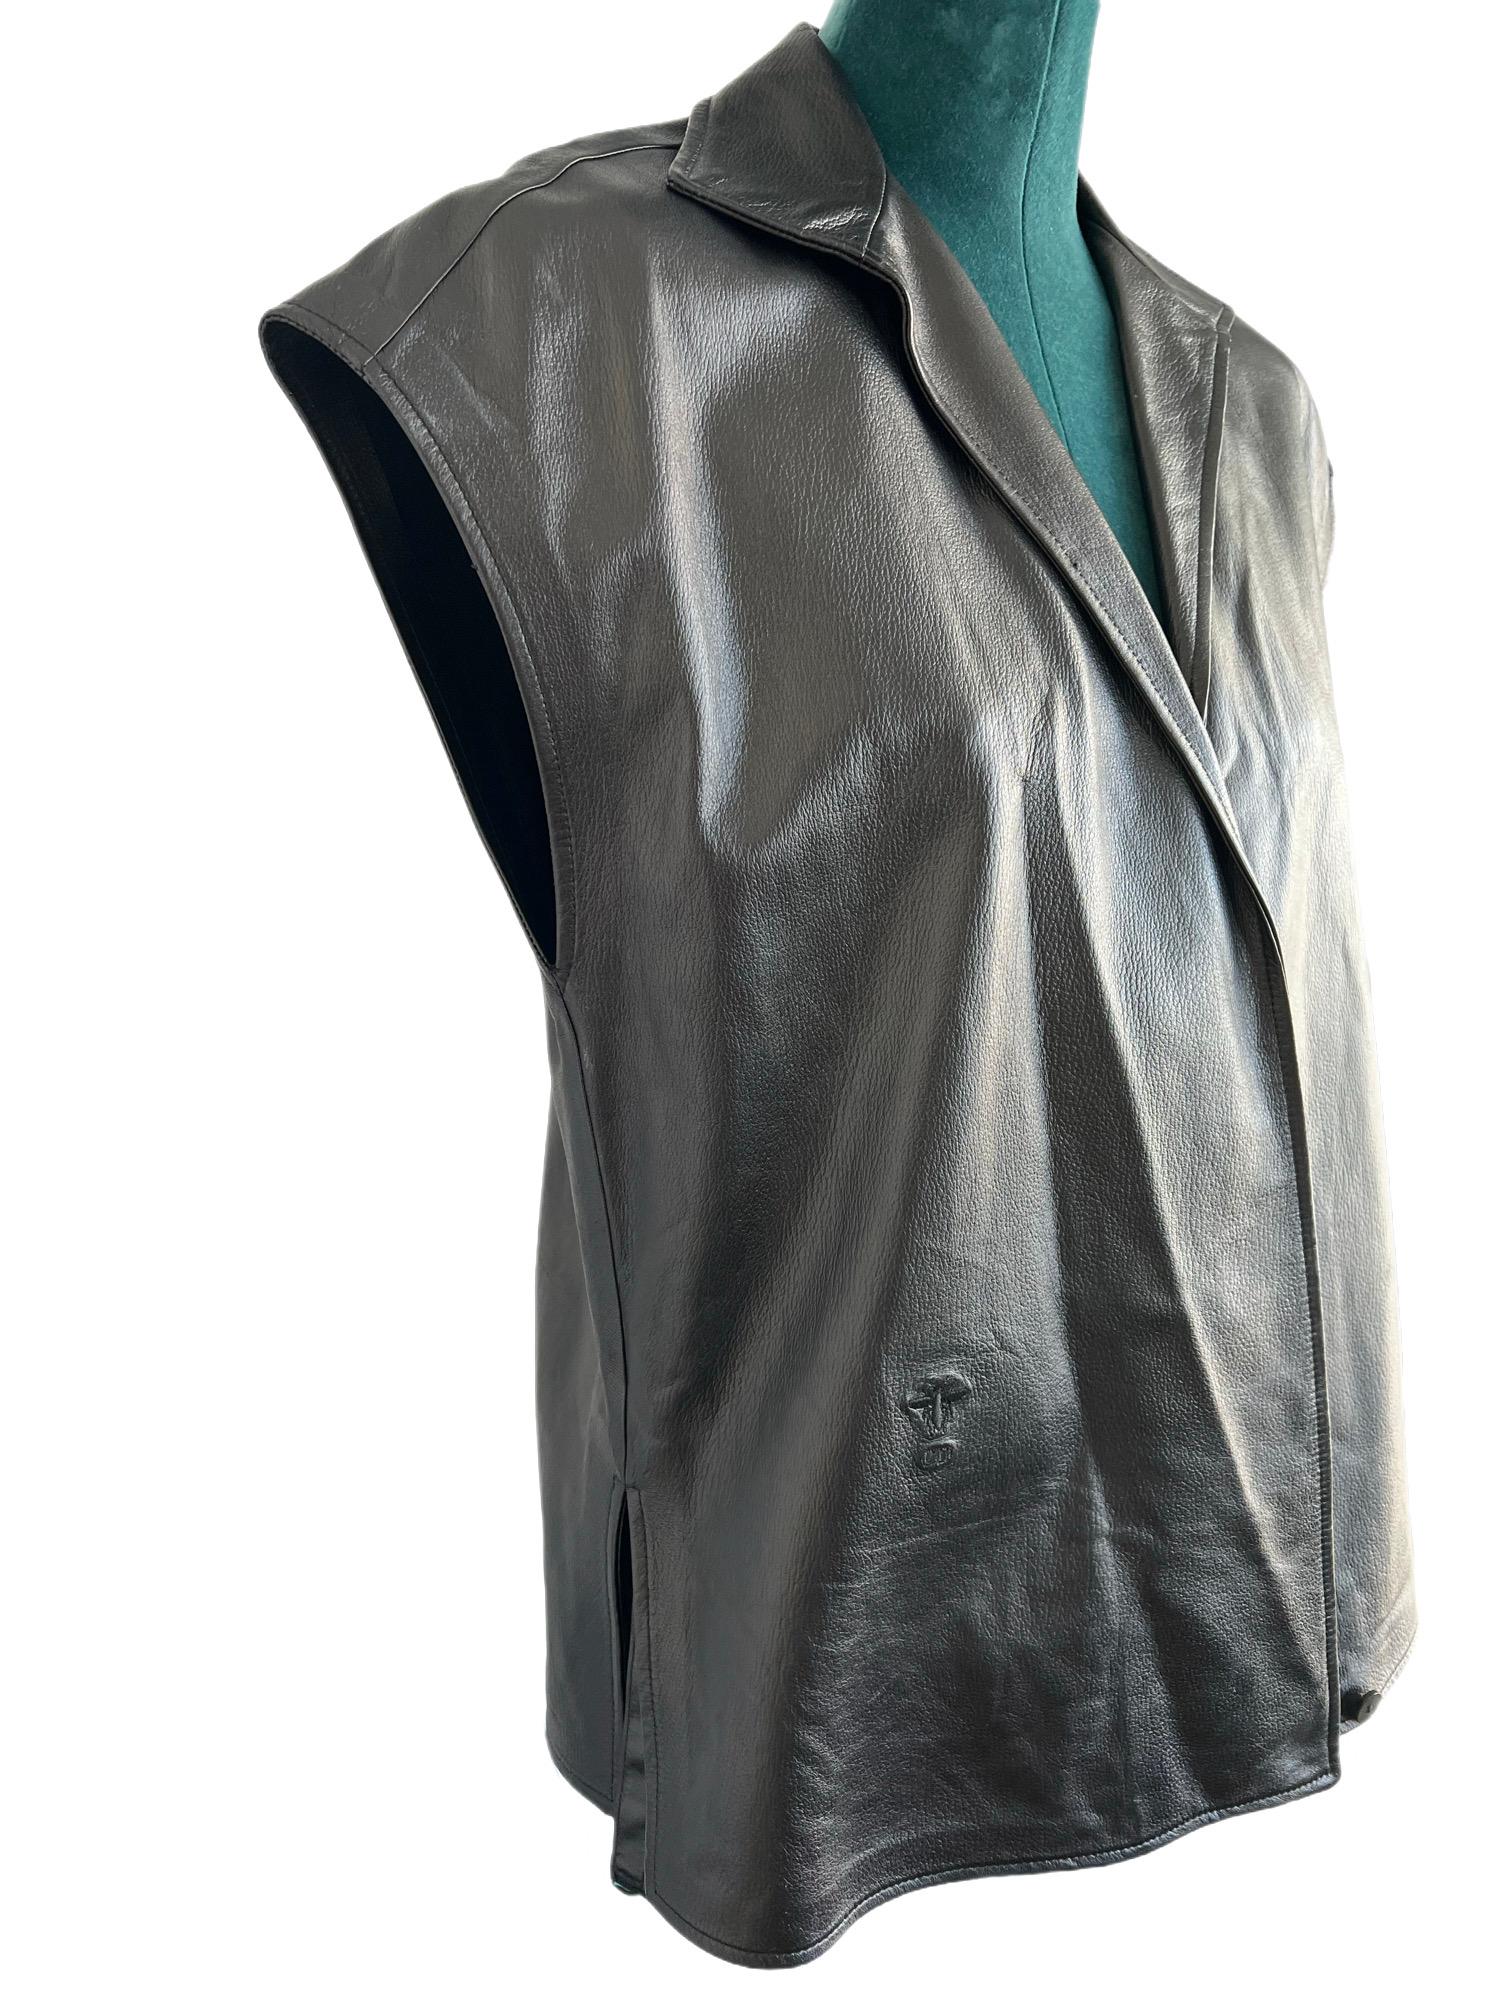 2019 Christian Dior Runway Leather Shirt In Excellent Condition For Sale In Toronto, CA